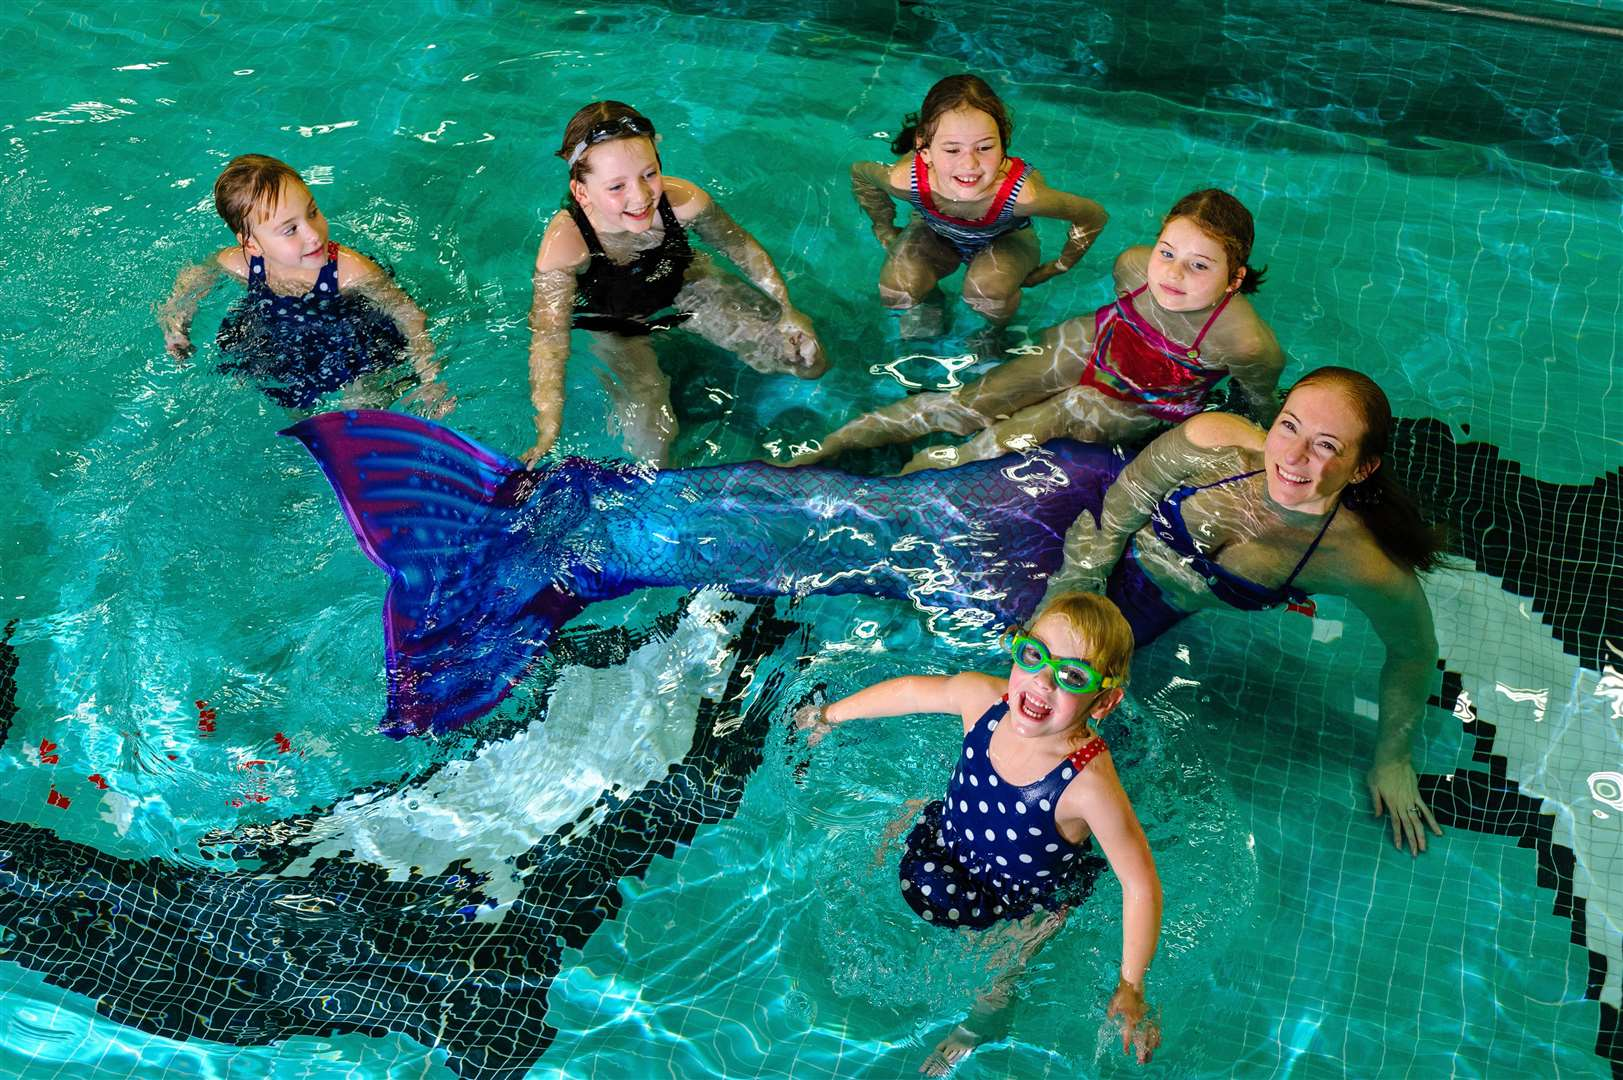 Diss leisure centre is a popular area for locals. It's a full leisure centre with classes and a fantastic family pool